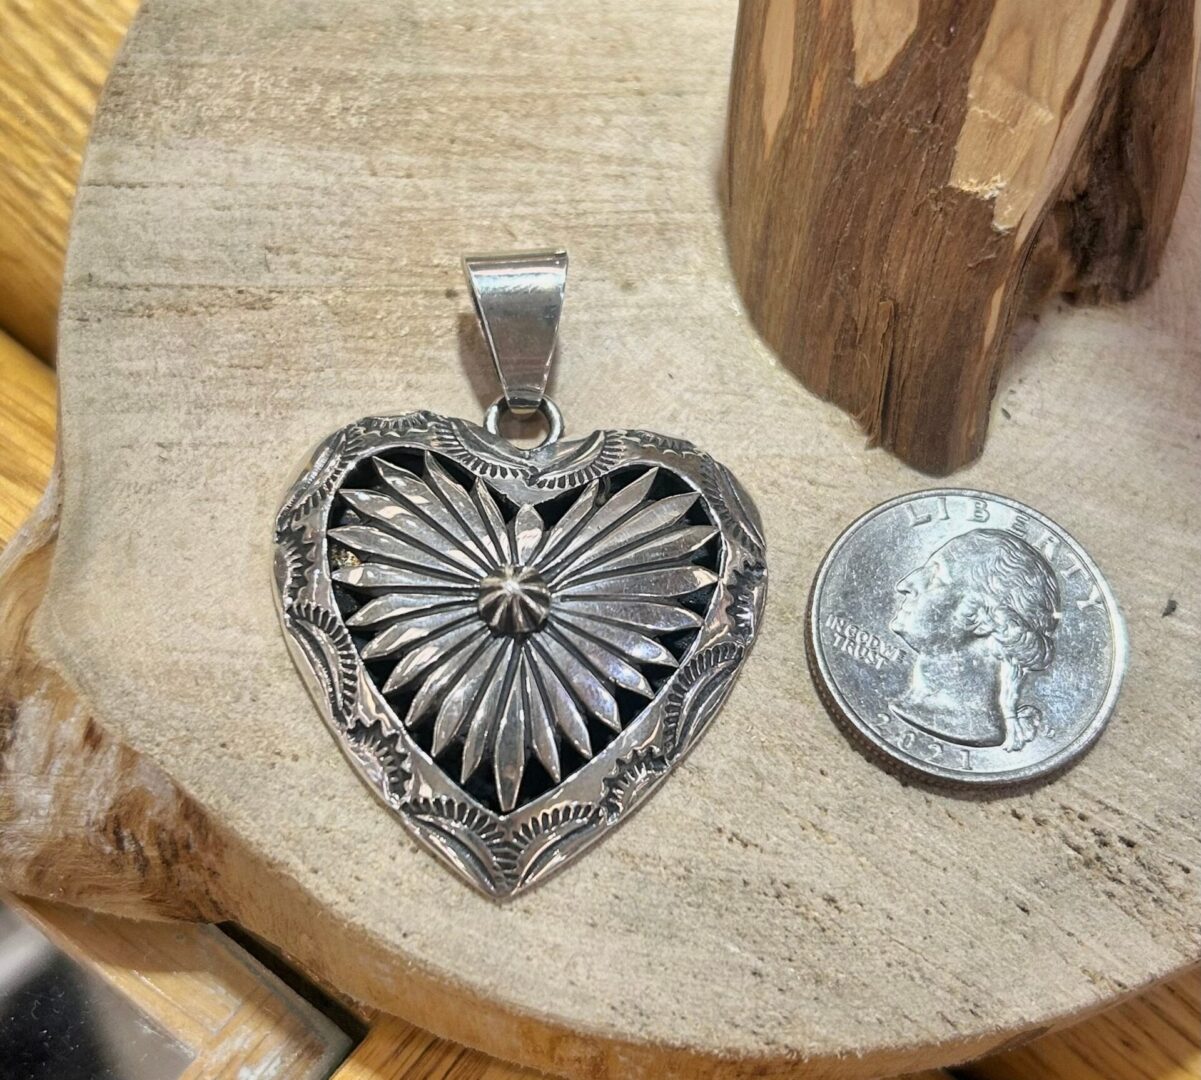 A silver heart shaped pendant next to a dime.